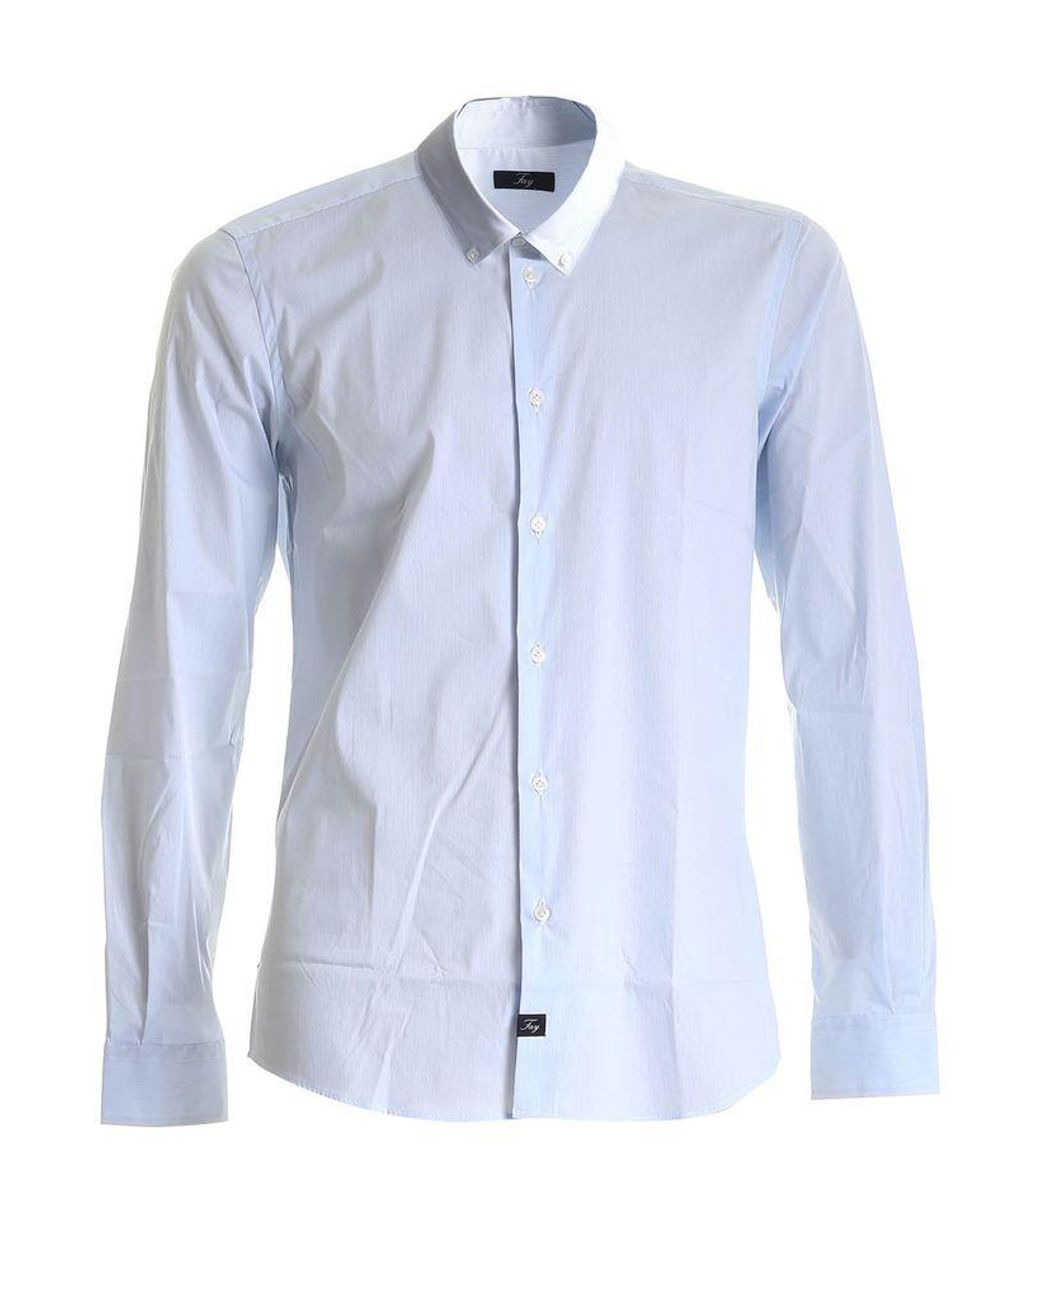 Fay Cotton Striped Button-down Shirt White And Light Blue for Men - Lyst